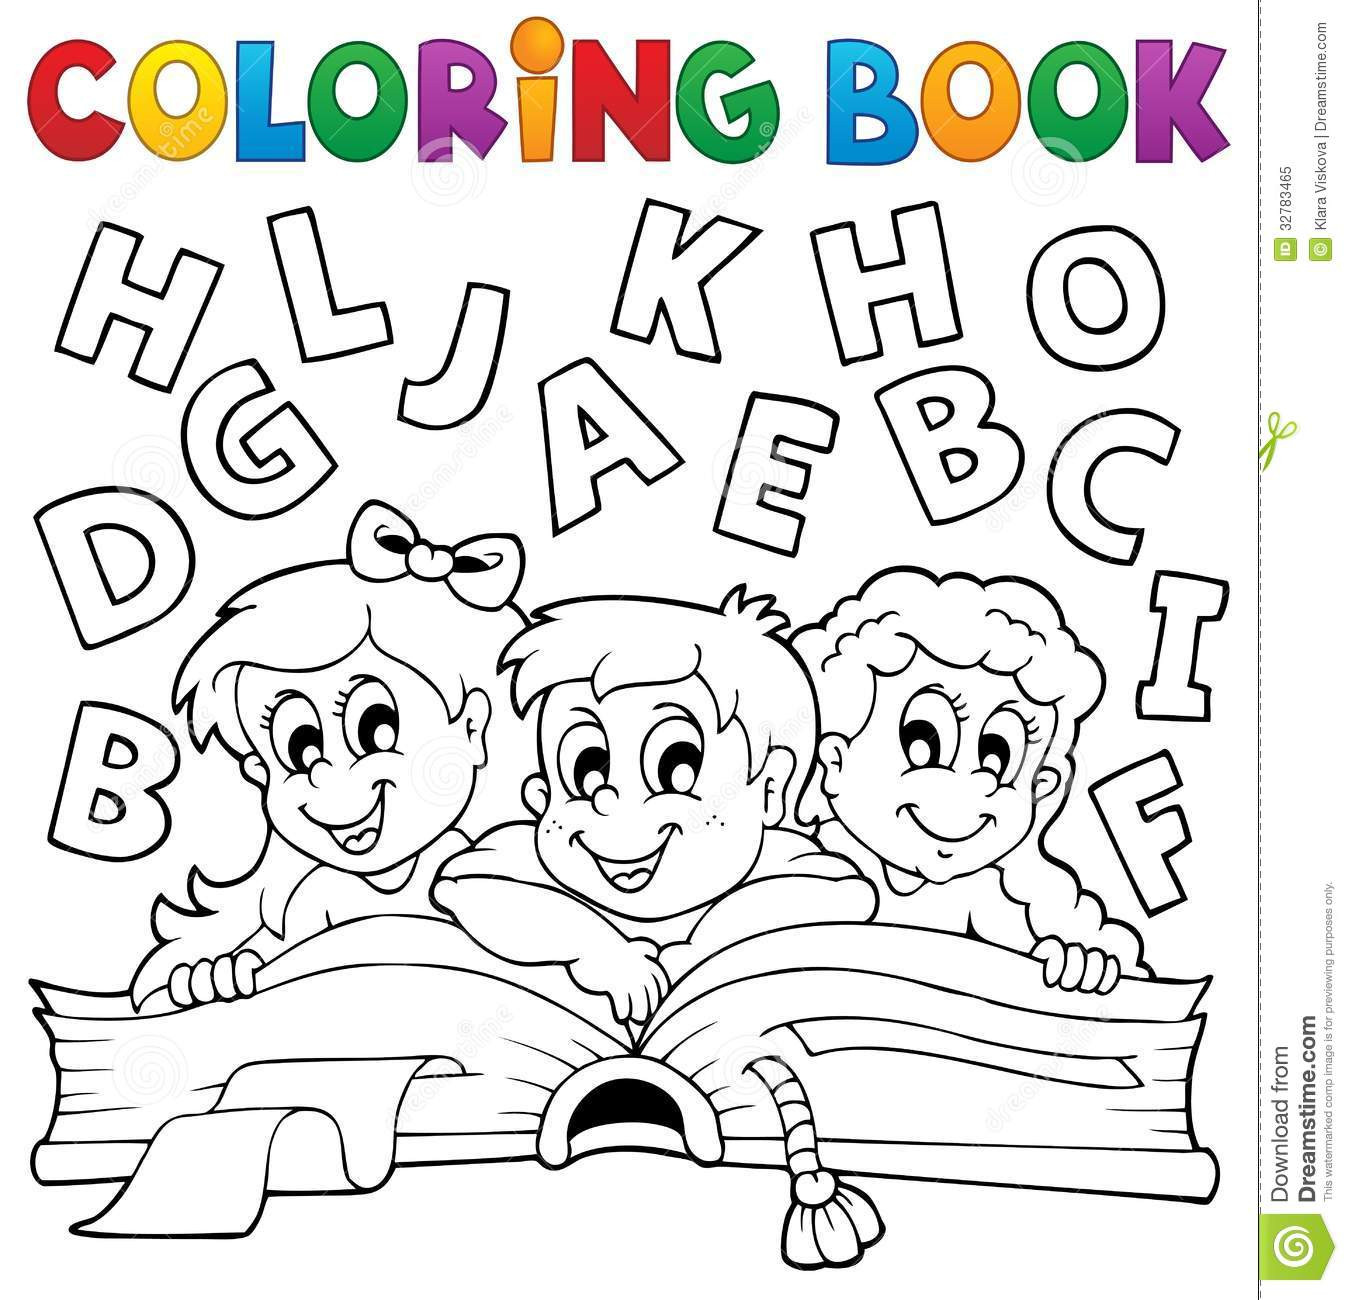 Kid Coloring Books
 Coloring book kids theme 5 stock vector Image of clipart